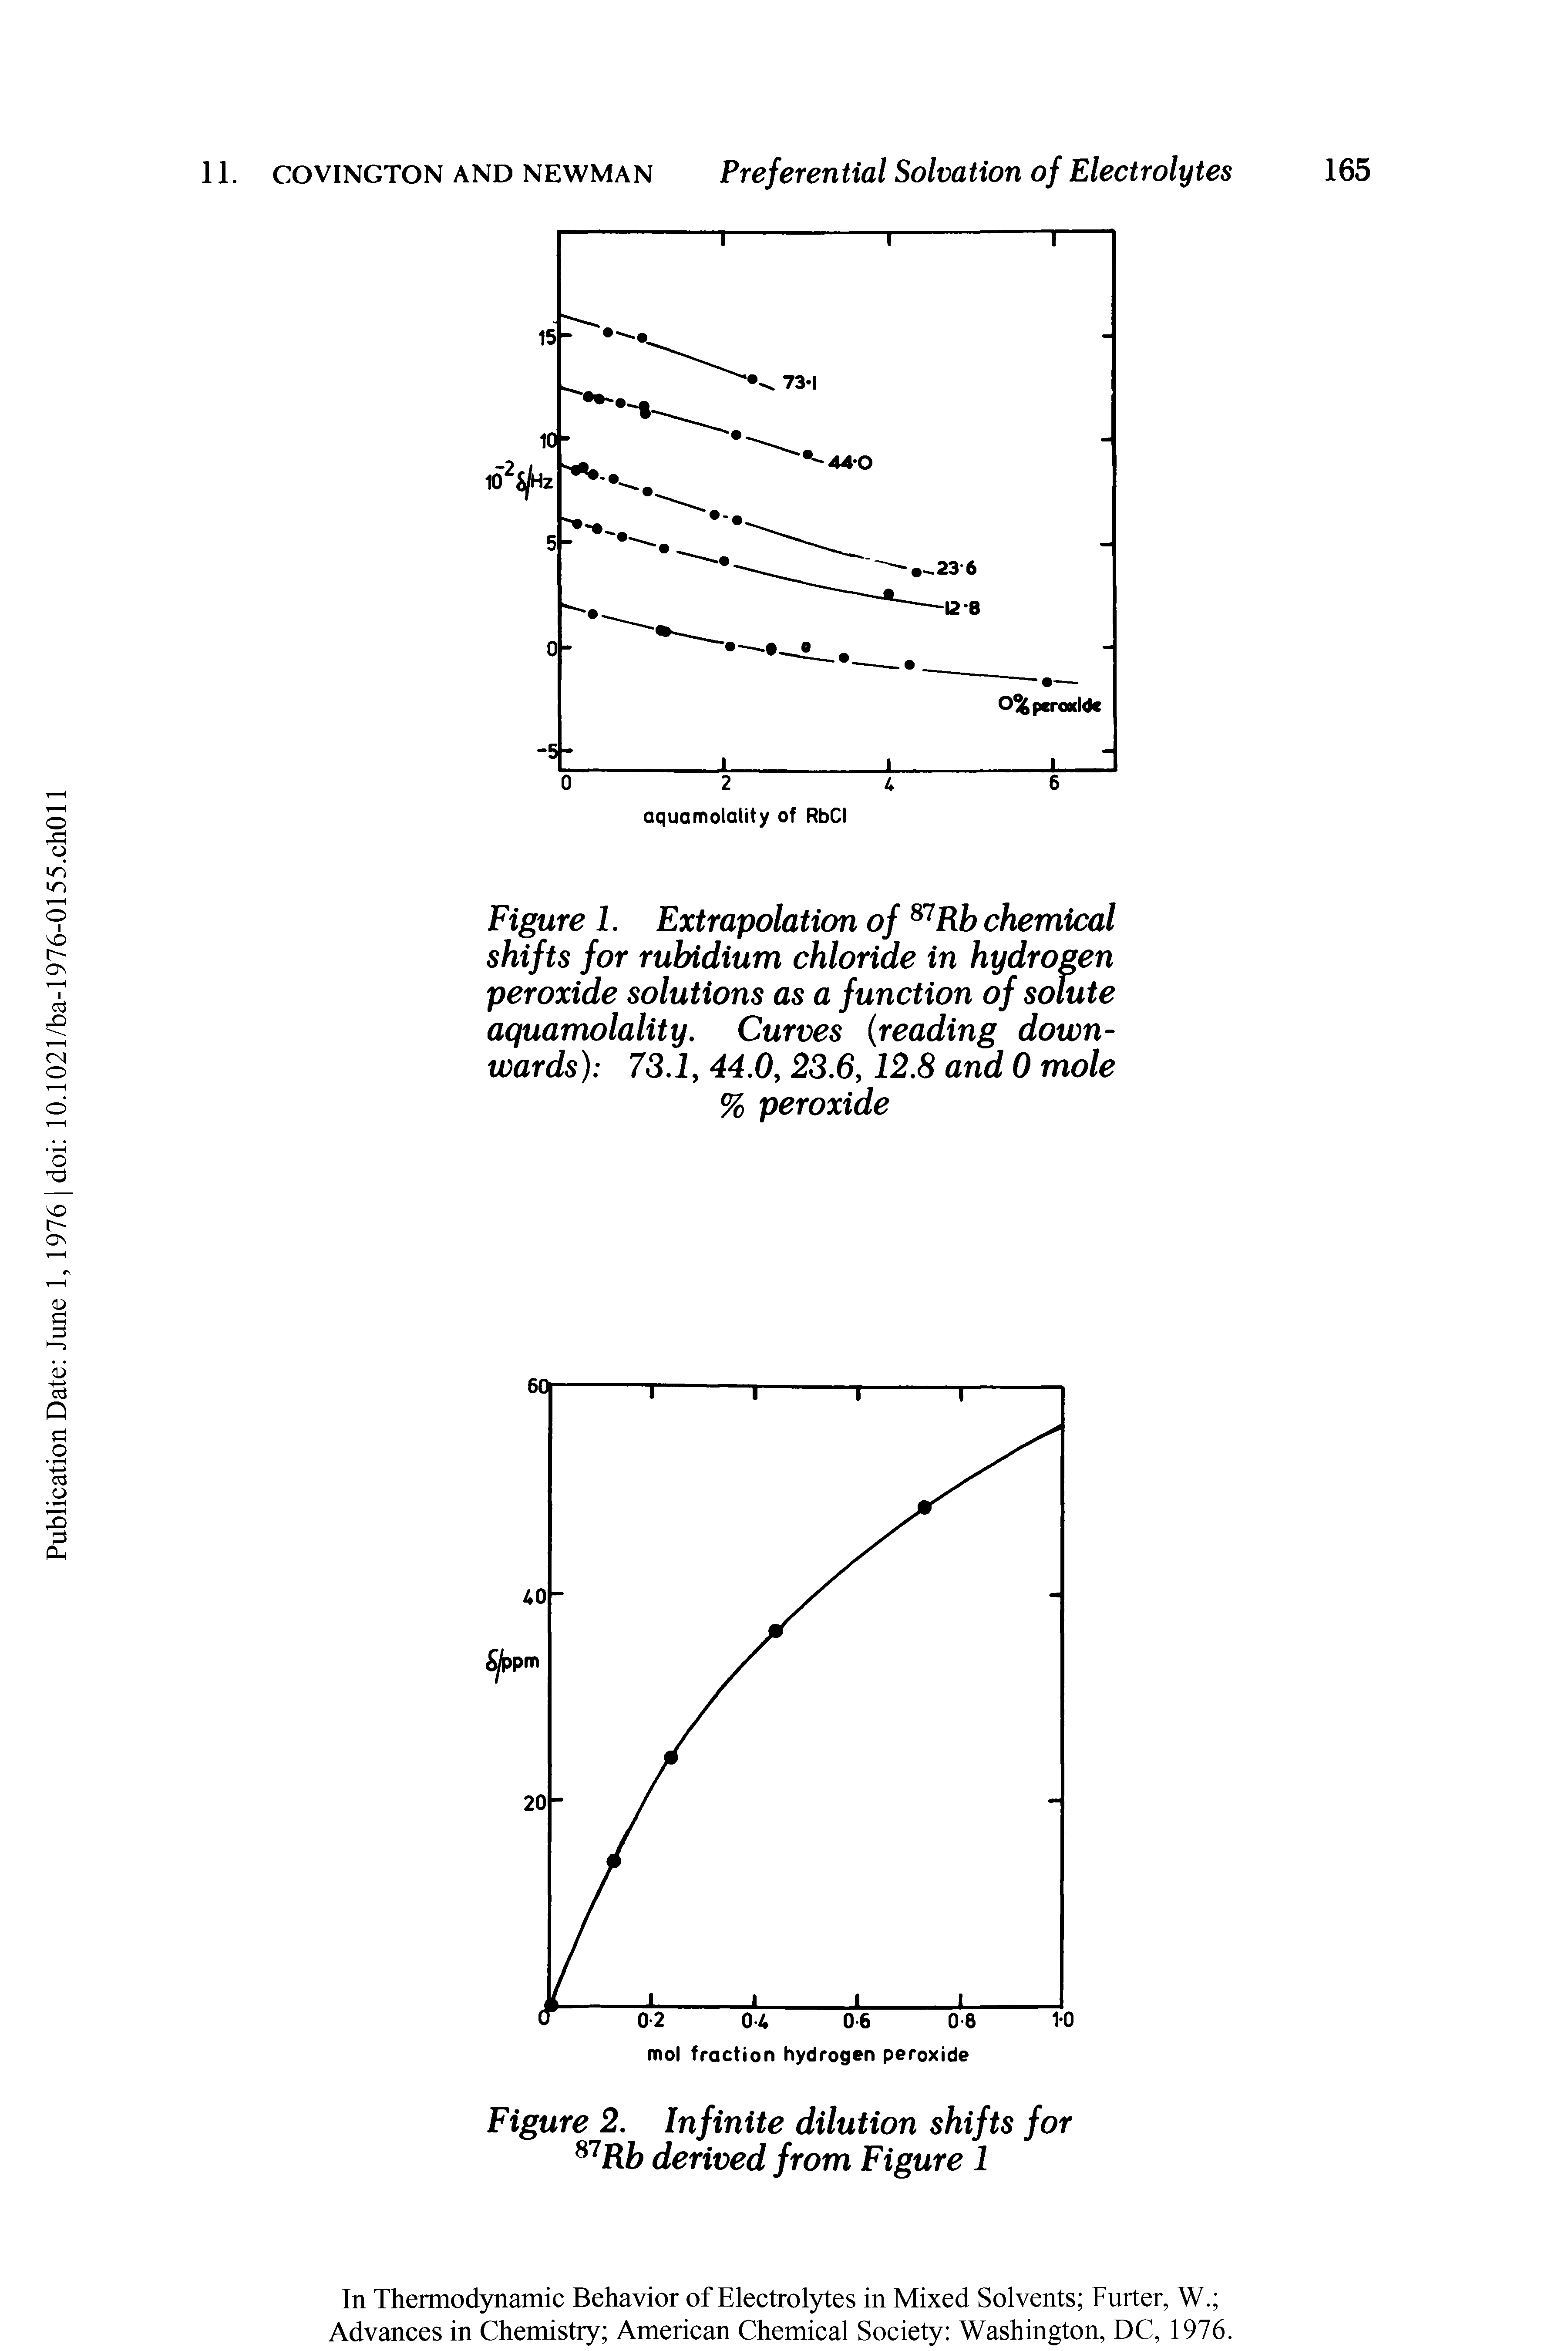 Figure 2. Infinite dilution shifts for 87Rb derived from Figure 1...